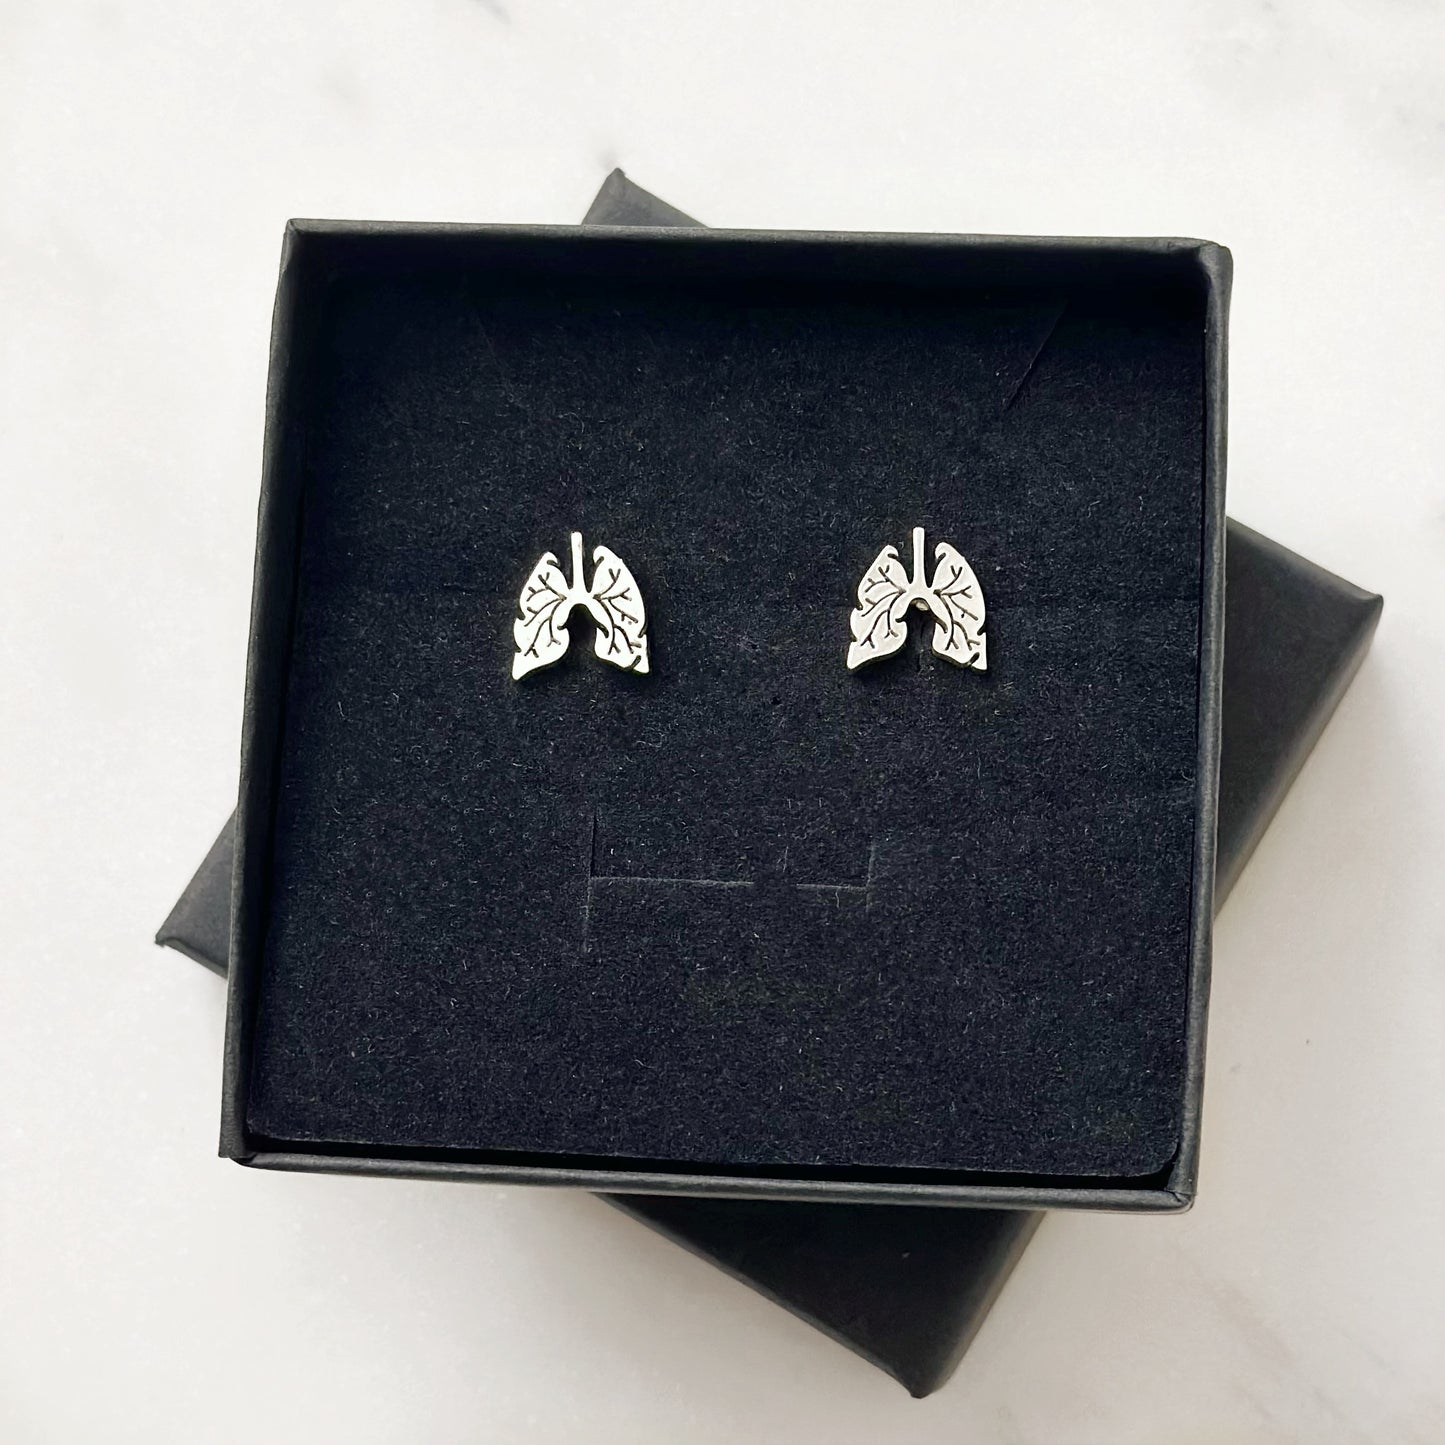 Lung stud Earrings, great gift for Nurses, Pulmonologists, Respiratory Therapists and other healthcare workers.